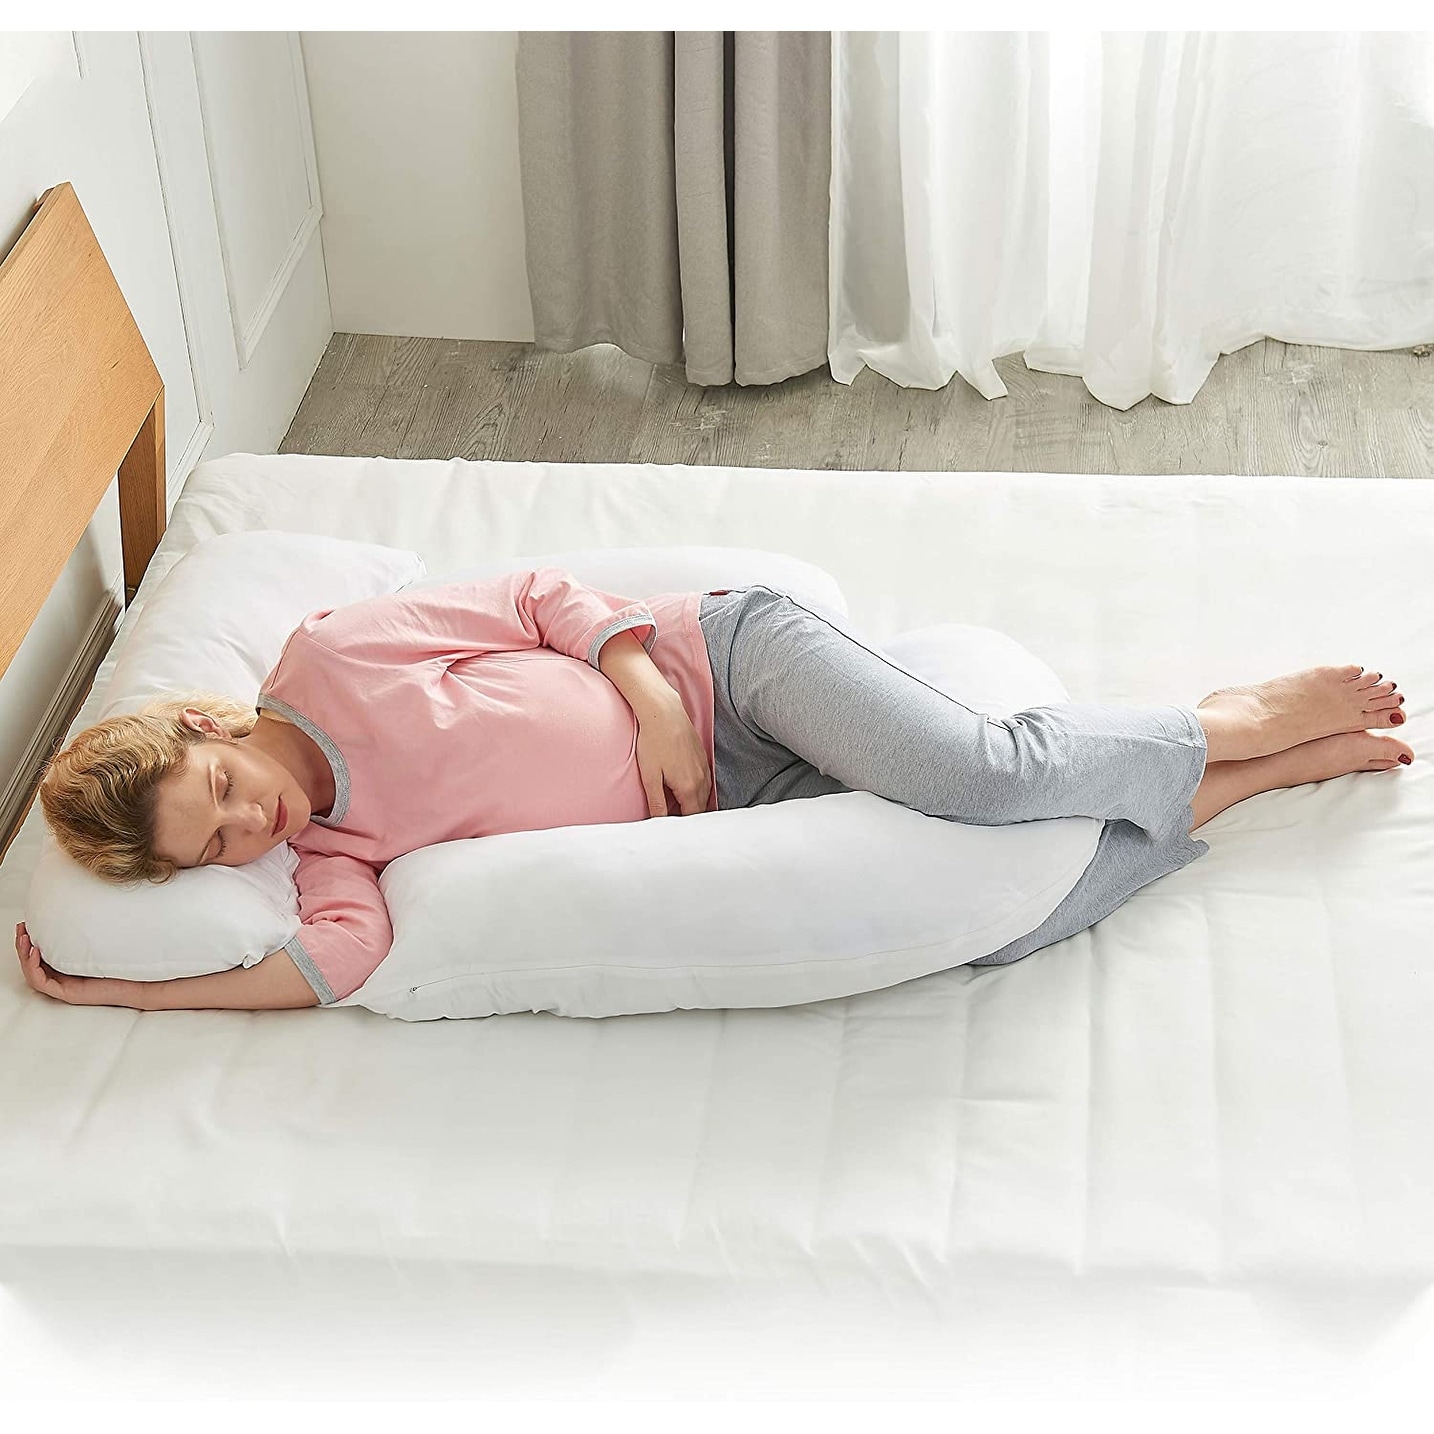 https://ak1.ostkcdn.com/images/products/is/images/direct/ce658616ac186596c132aa410a397d04cfe92809/Cheer-Collection-U-Shaped-Pregnancy-Support-Body-Pillow-with-Adjustable-Positions.jpg